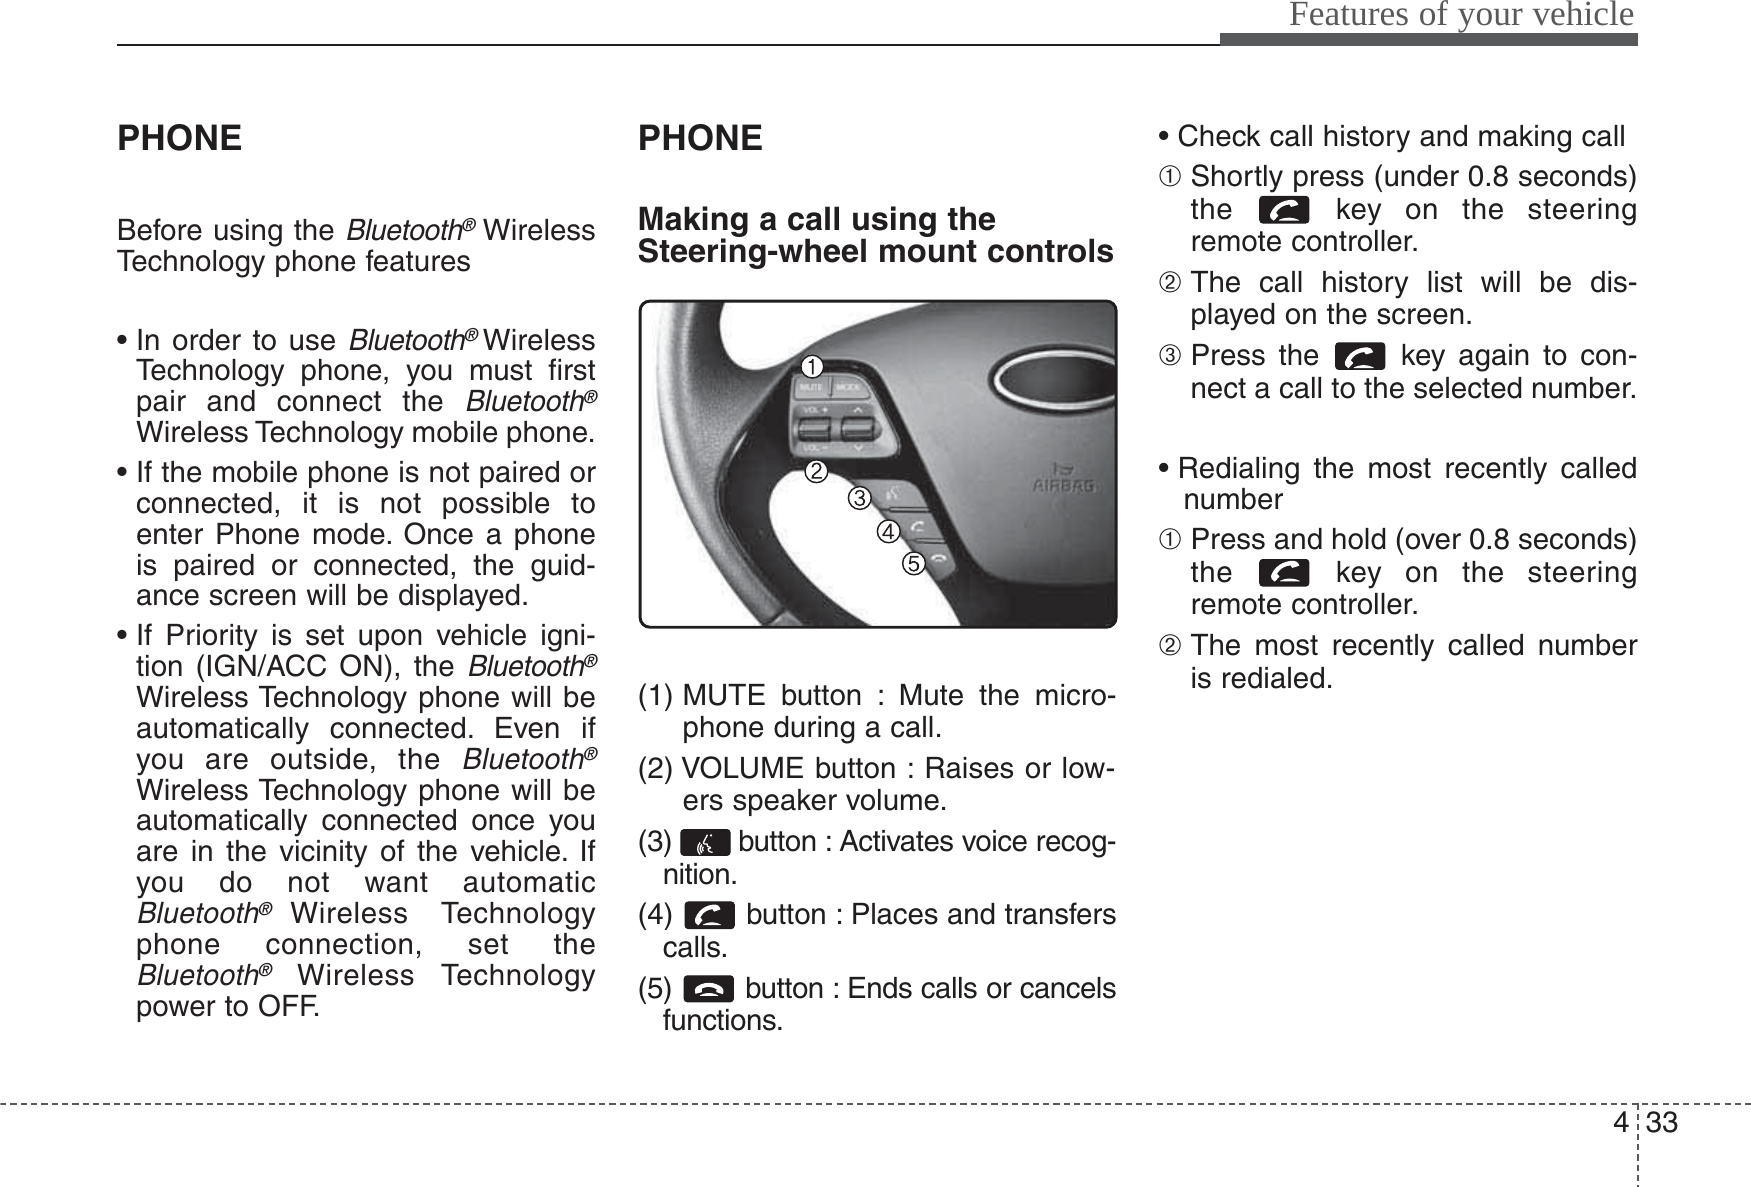 433Features of your vehiclePHONEBefore using the Bluetooth®WirelessTechnology phone features• In order to use Bluetooth® WirelessTechnology phone, you must firstpair and connect the Bluetooth®Wireless Technology mobile phone.• If the mobile phone is not paired orconnected, it is not possible toenter Phone mode. Once a phoneis paired or connected, the guid-ance screen will be displayed.• If Priority is set upon vehicle igni-tion (IGN/ACC ON), the Bluetooth®Wireless Technology phone will beautomatically connected. Even ifyou are outside, the Bluetooth®Wireless Technology phone will beautomatically connected once youare in the vicinity of the vehicle. Ifyou do not want automaticBluetooth® Wireless Technologyphone connection, set theBluetooth®Wireless Technologypower to OFF.PHONEMaking a call using theSteering-wheel mount controls(1) MUTE button : Mute the micro-phone during a call.(2) VOLUME button : Raises or low-ers speaker volume.(3)  button : Activates voice recog-nition.(4) button : Places and transferscalls.(5)  button : Ends calls or cancelsfunctions.• Check call history and making call➀ Shortly press (under 0.8 seconds)the  key on the steeringremote controller.➁ The call history list will be dis-played on the screen.➂ Press the  key again to con-nect a call to the selected number.• Redialing the most recently callednumber➀ Press and hold (over 0.8 seconds)the  key on the steeringremote controller.➁ The most recently called numberis redialed.